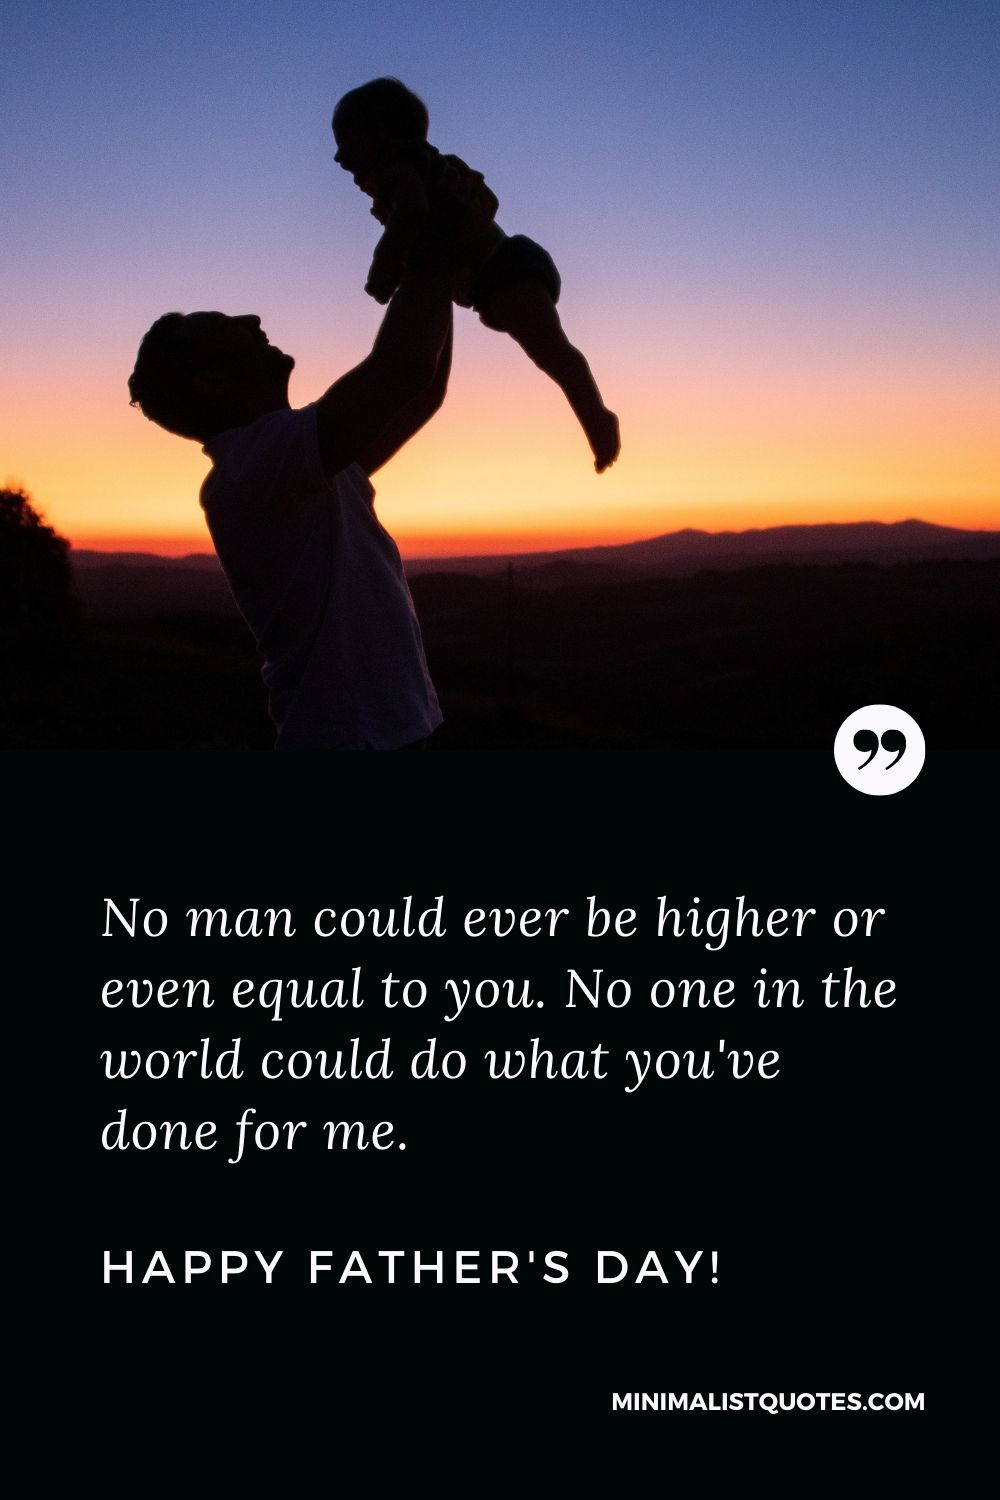 Fathers Day Quote, Wish & Message With Image: No man could ever be higher or even equal to you. No one in the world could do what you've done for me. Happy Fathers Day!